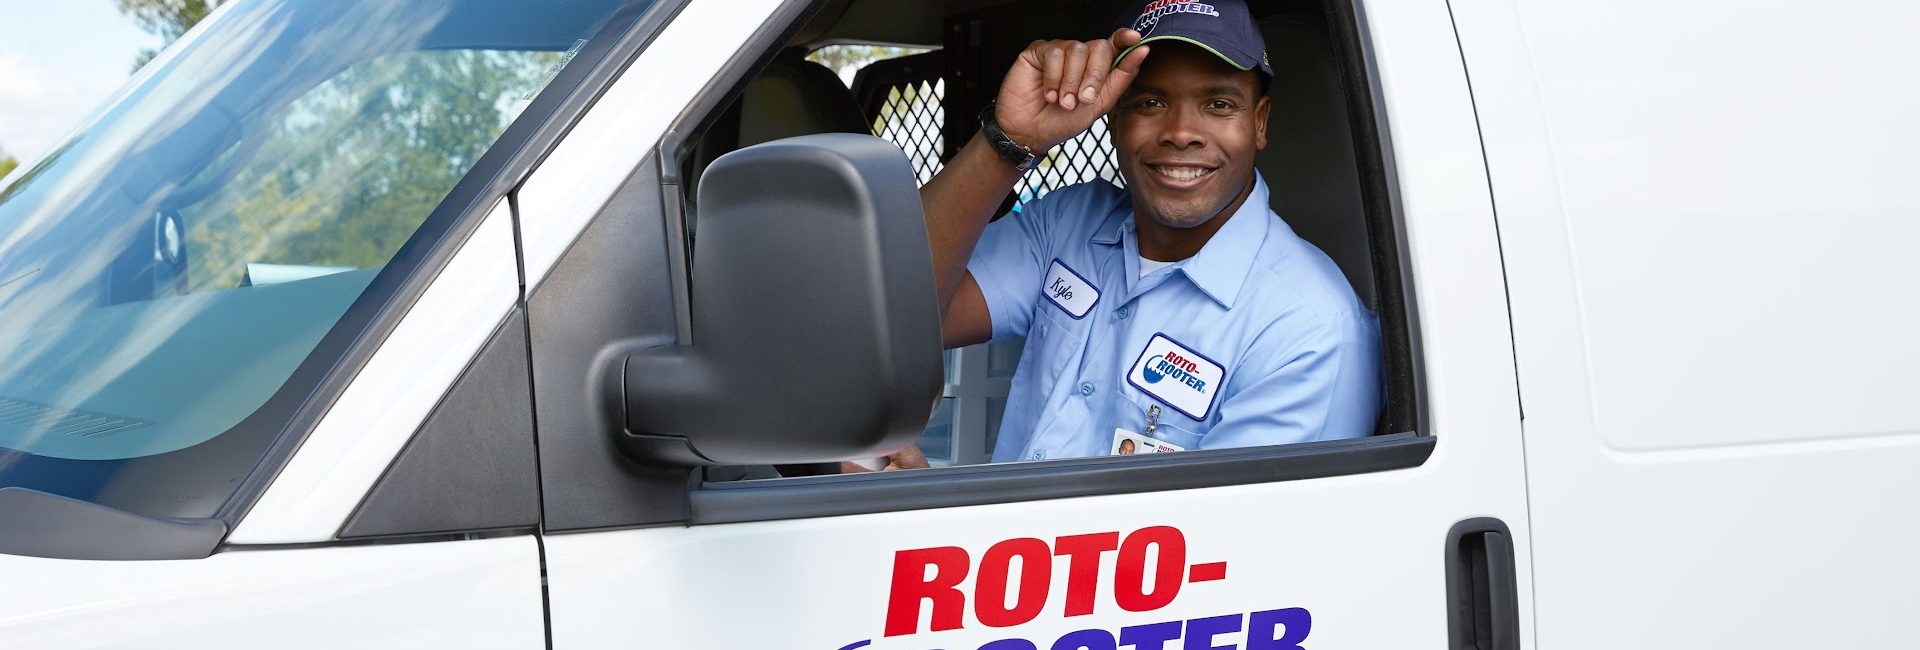 Roto-Rooter Plumbing & Water Cleanup 6